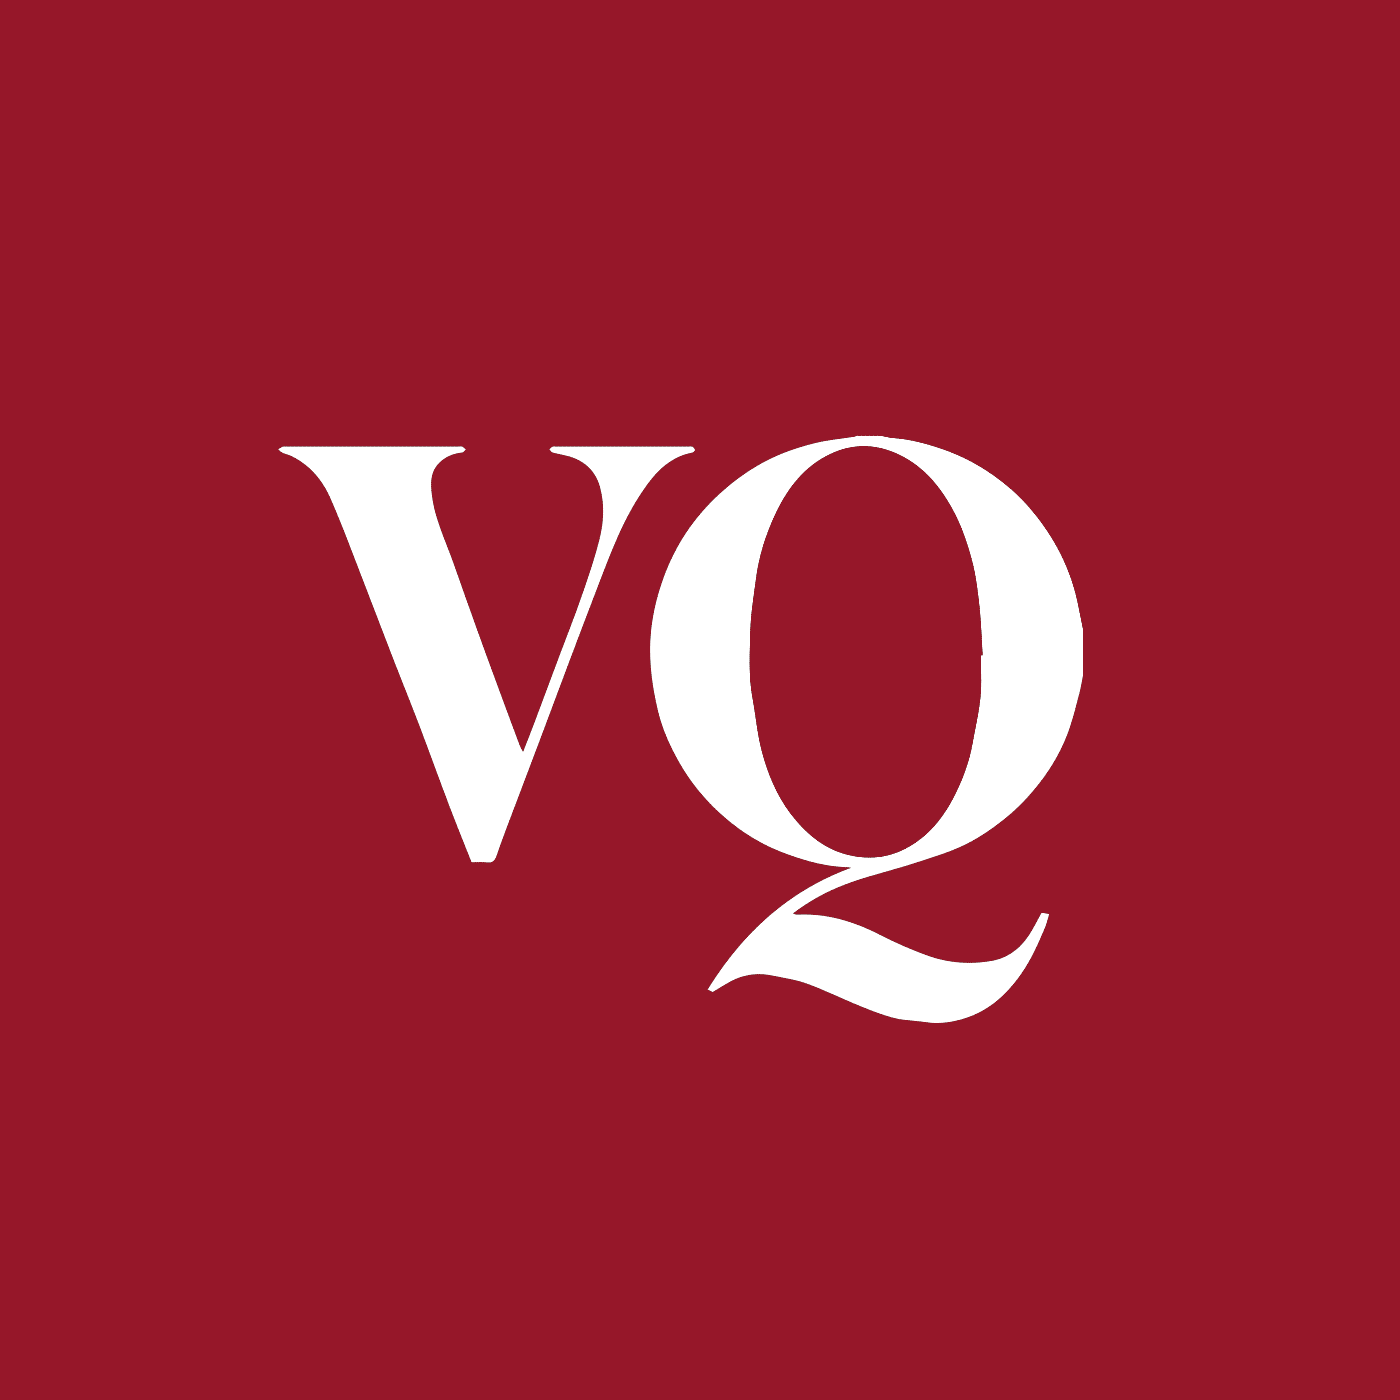 A red square with white lettering that spells out VQ.